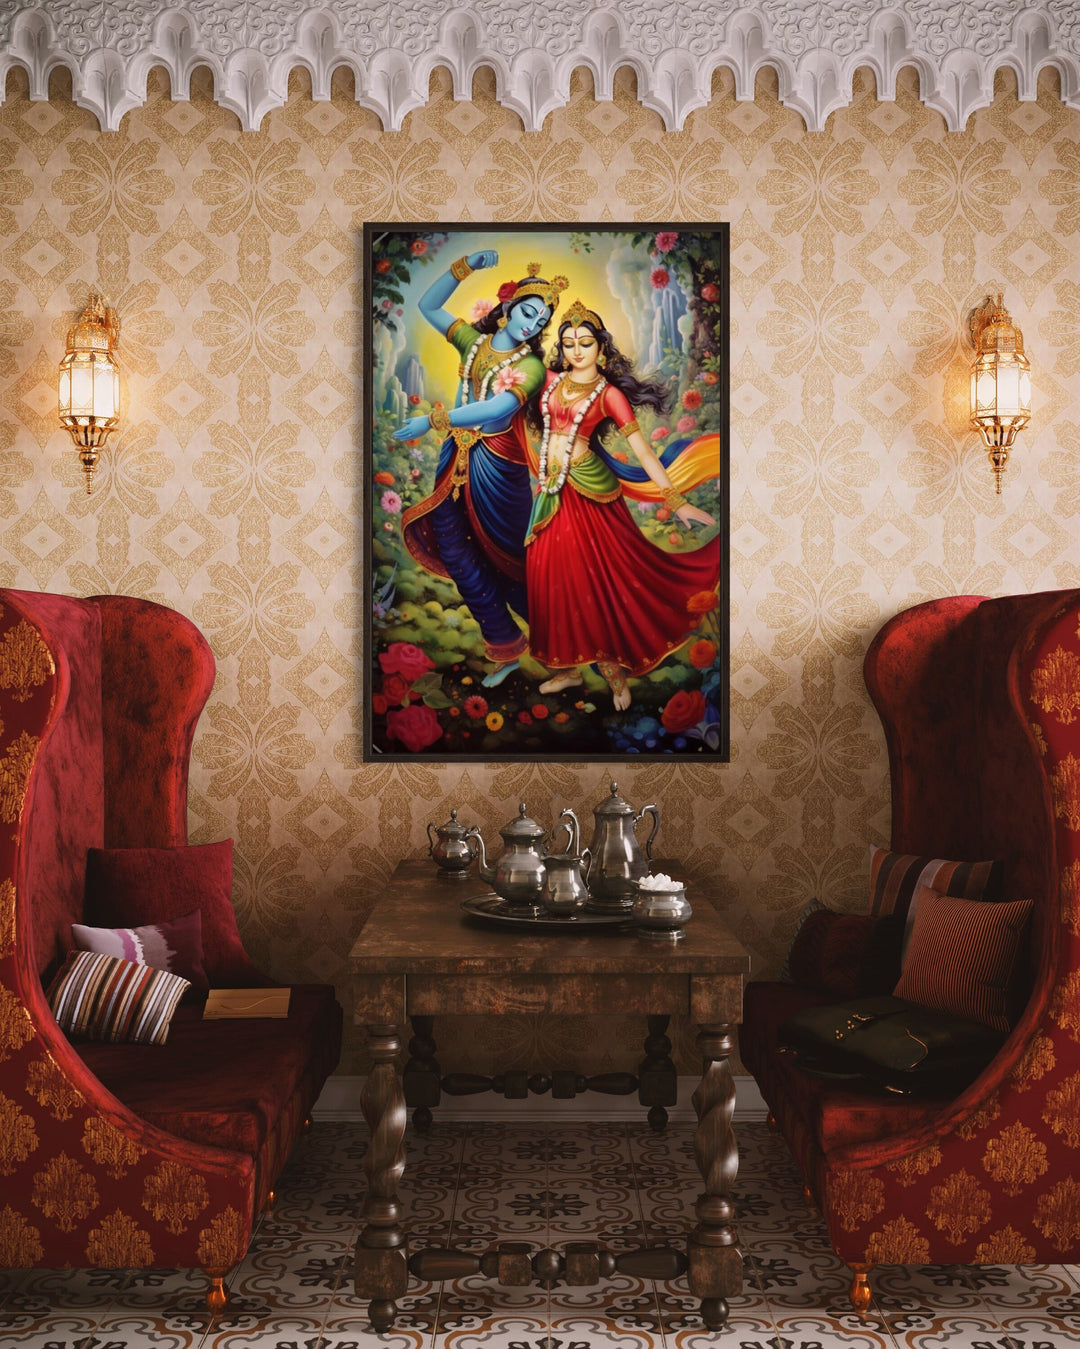 Lord Krishna And Radha Dancing Colorful Indian Wall Art "Divine Rhapsody"  in indian restaurant